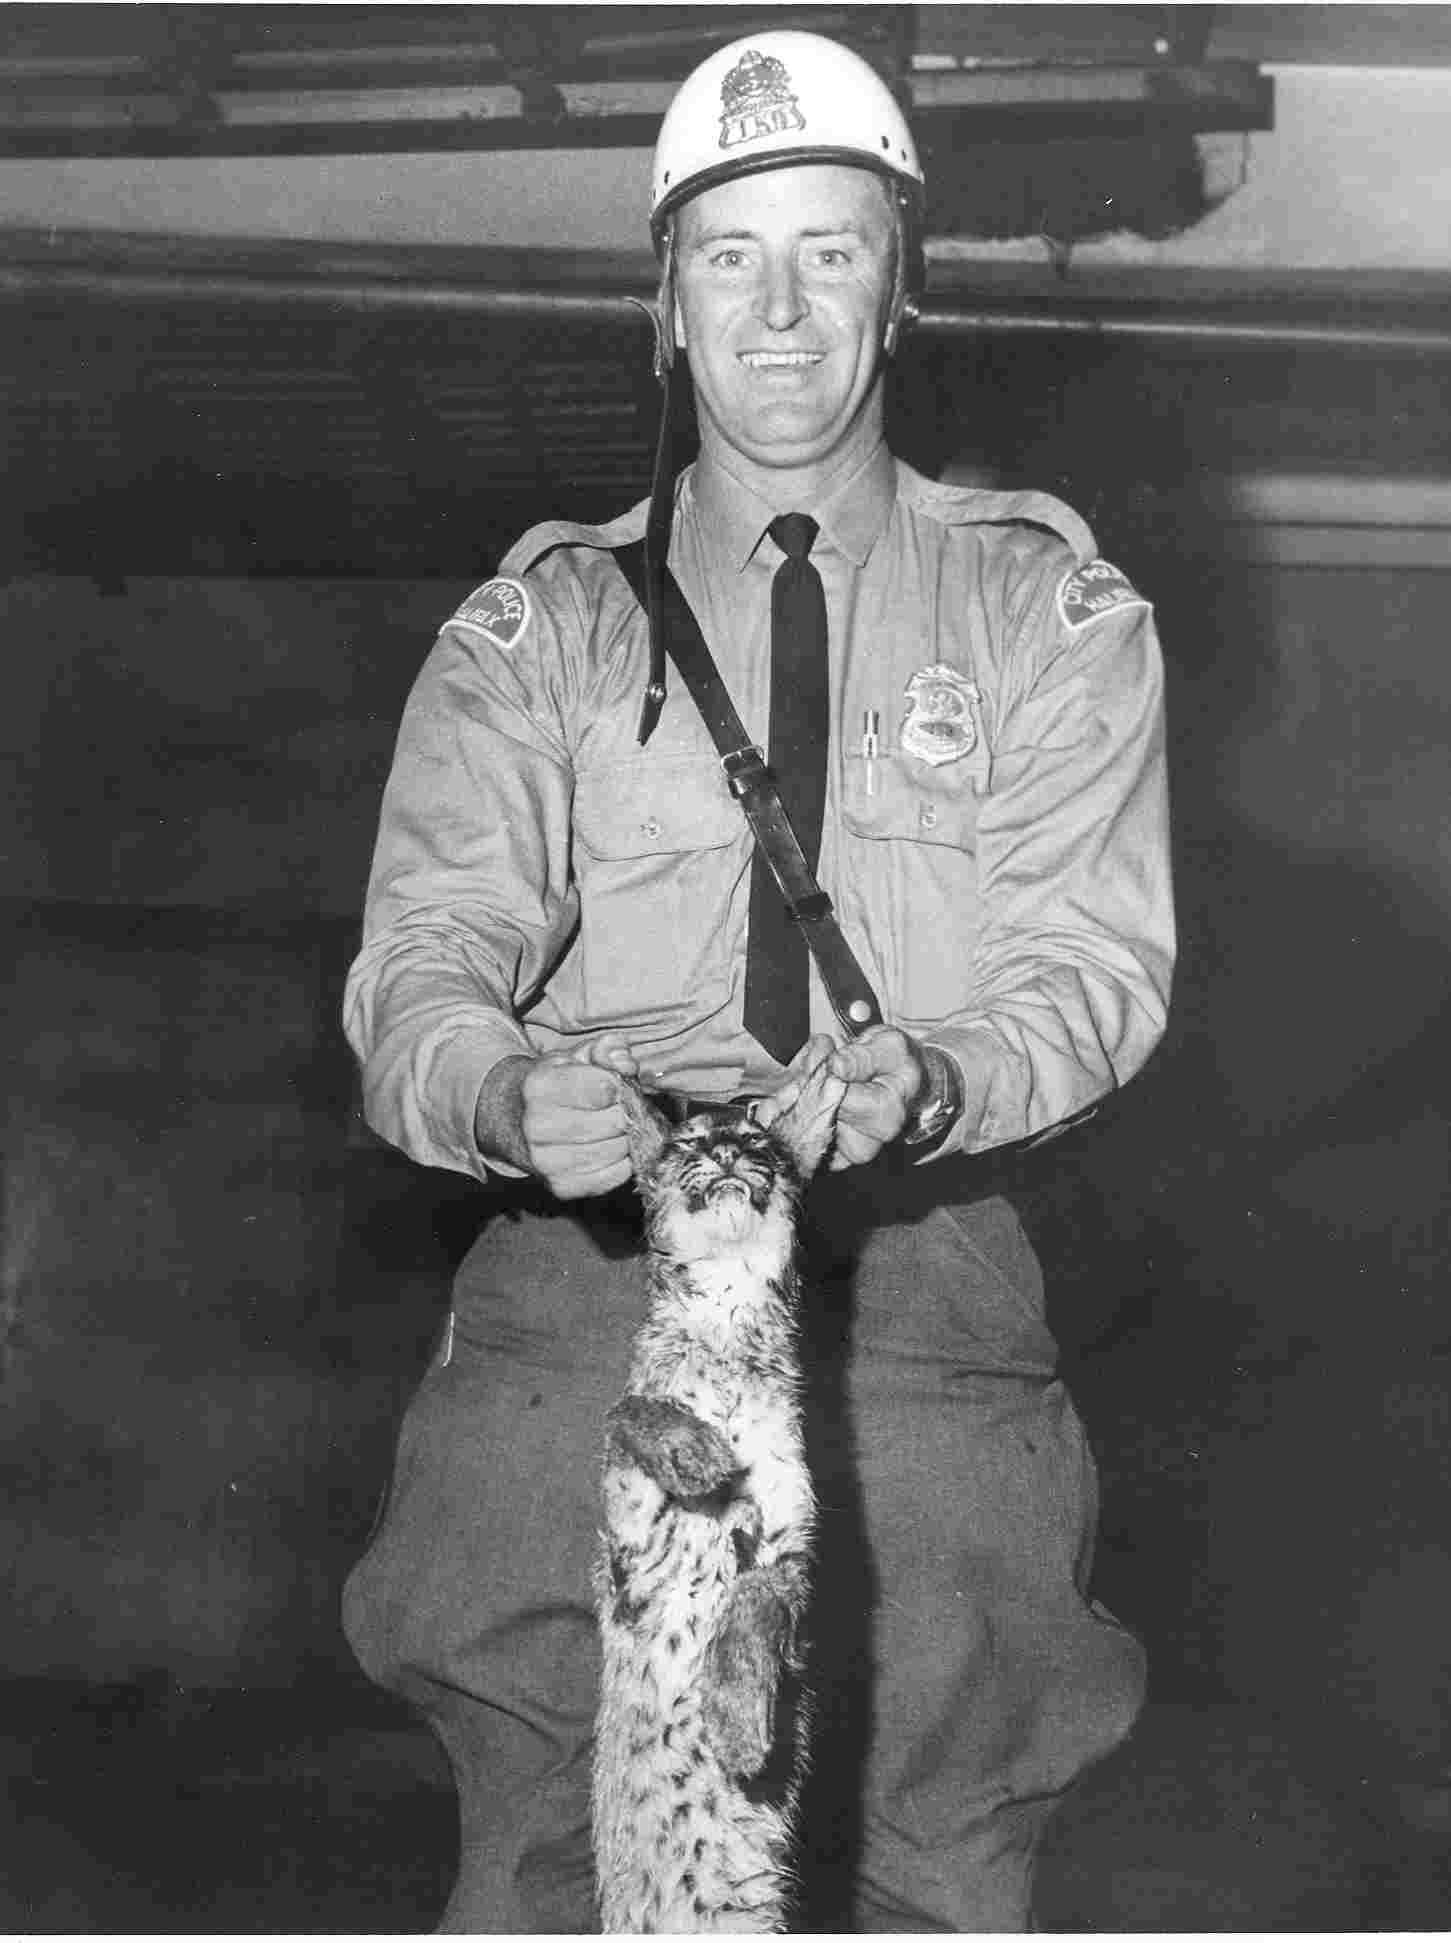 Black and white photo of police officer smiling holding wildcat by the ears